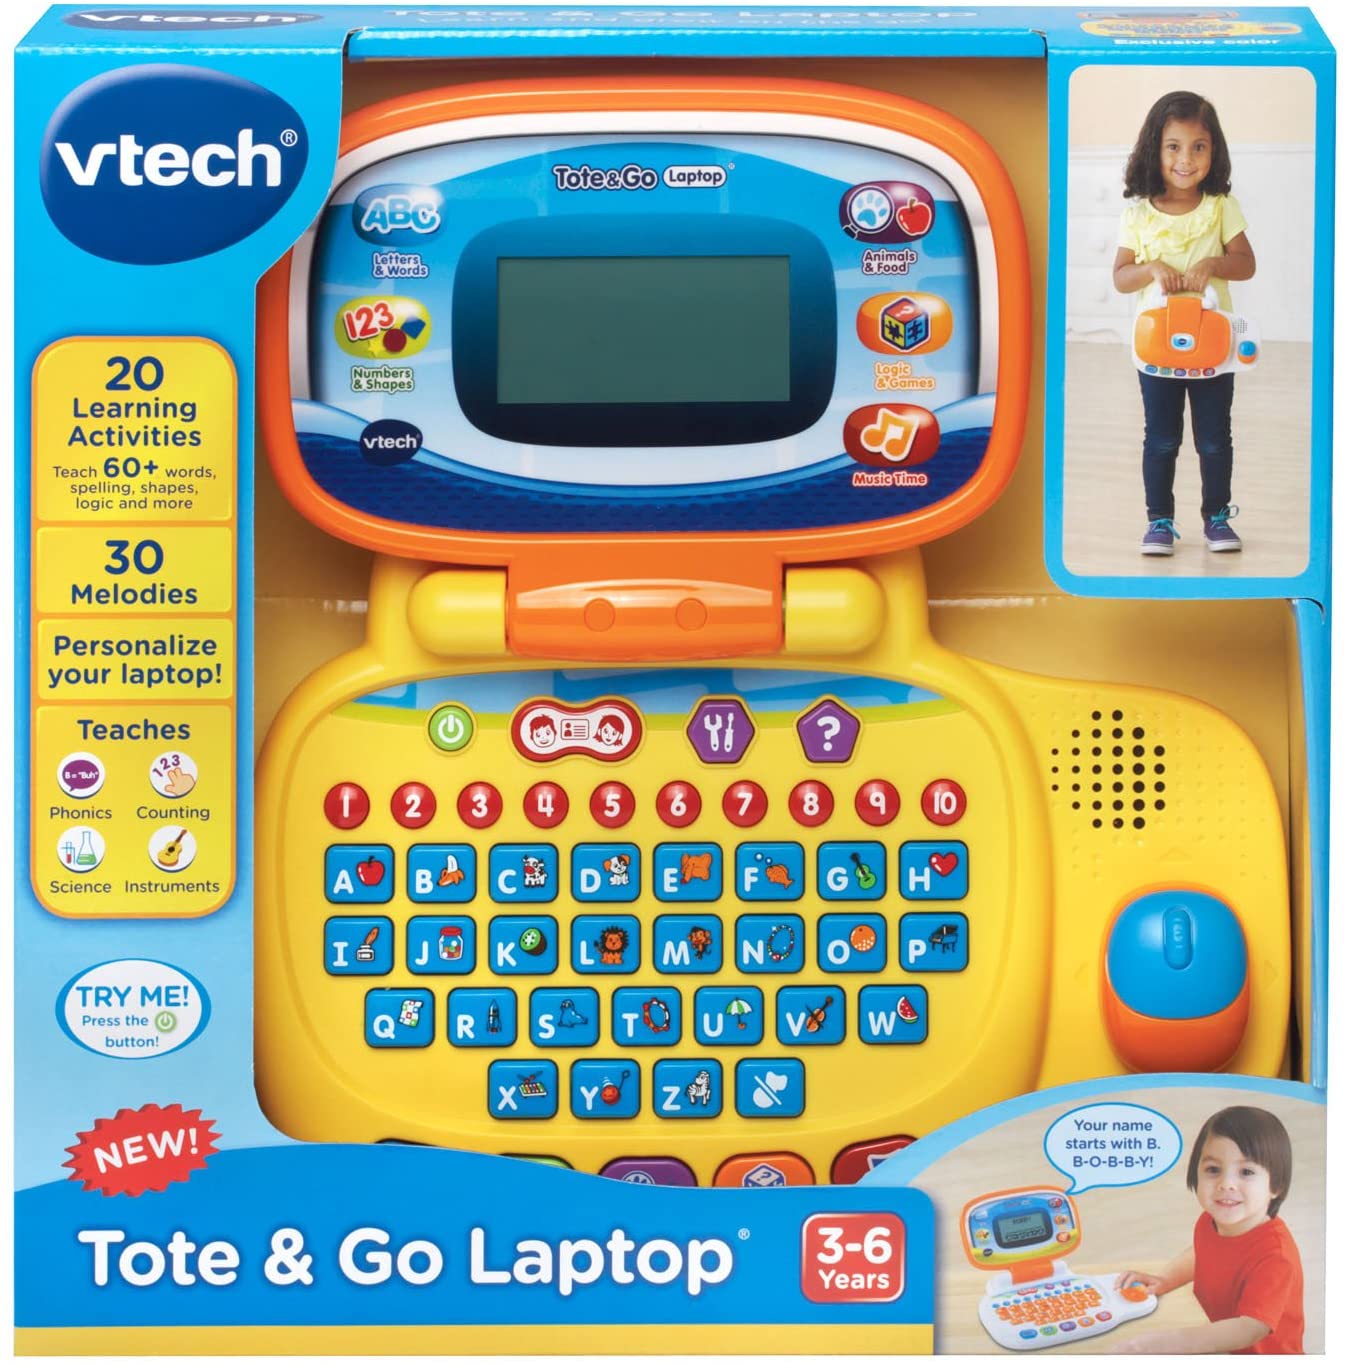 vtech　アクティビティ　子供用　ラップトップ　VTech Tote and Go Laptop,　キッズ 子供 知育玩具　英会話　英語 【送料無料】【代引不可】【あす楽不可】 3